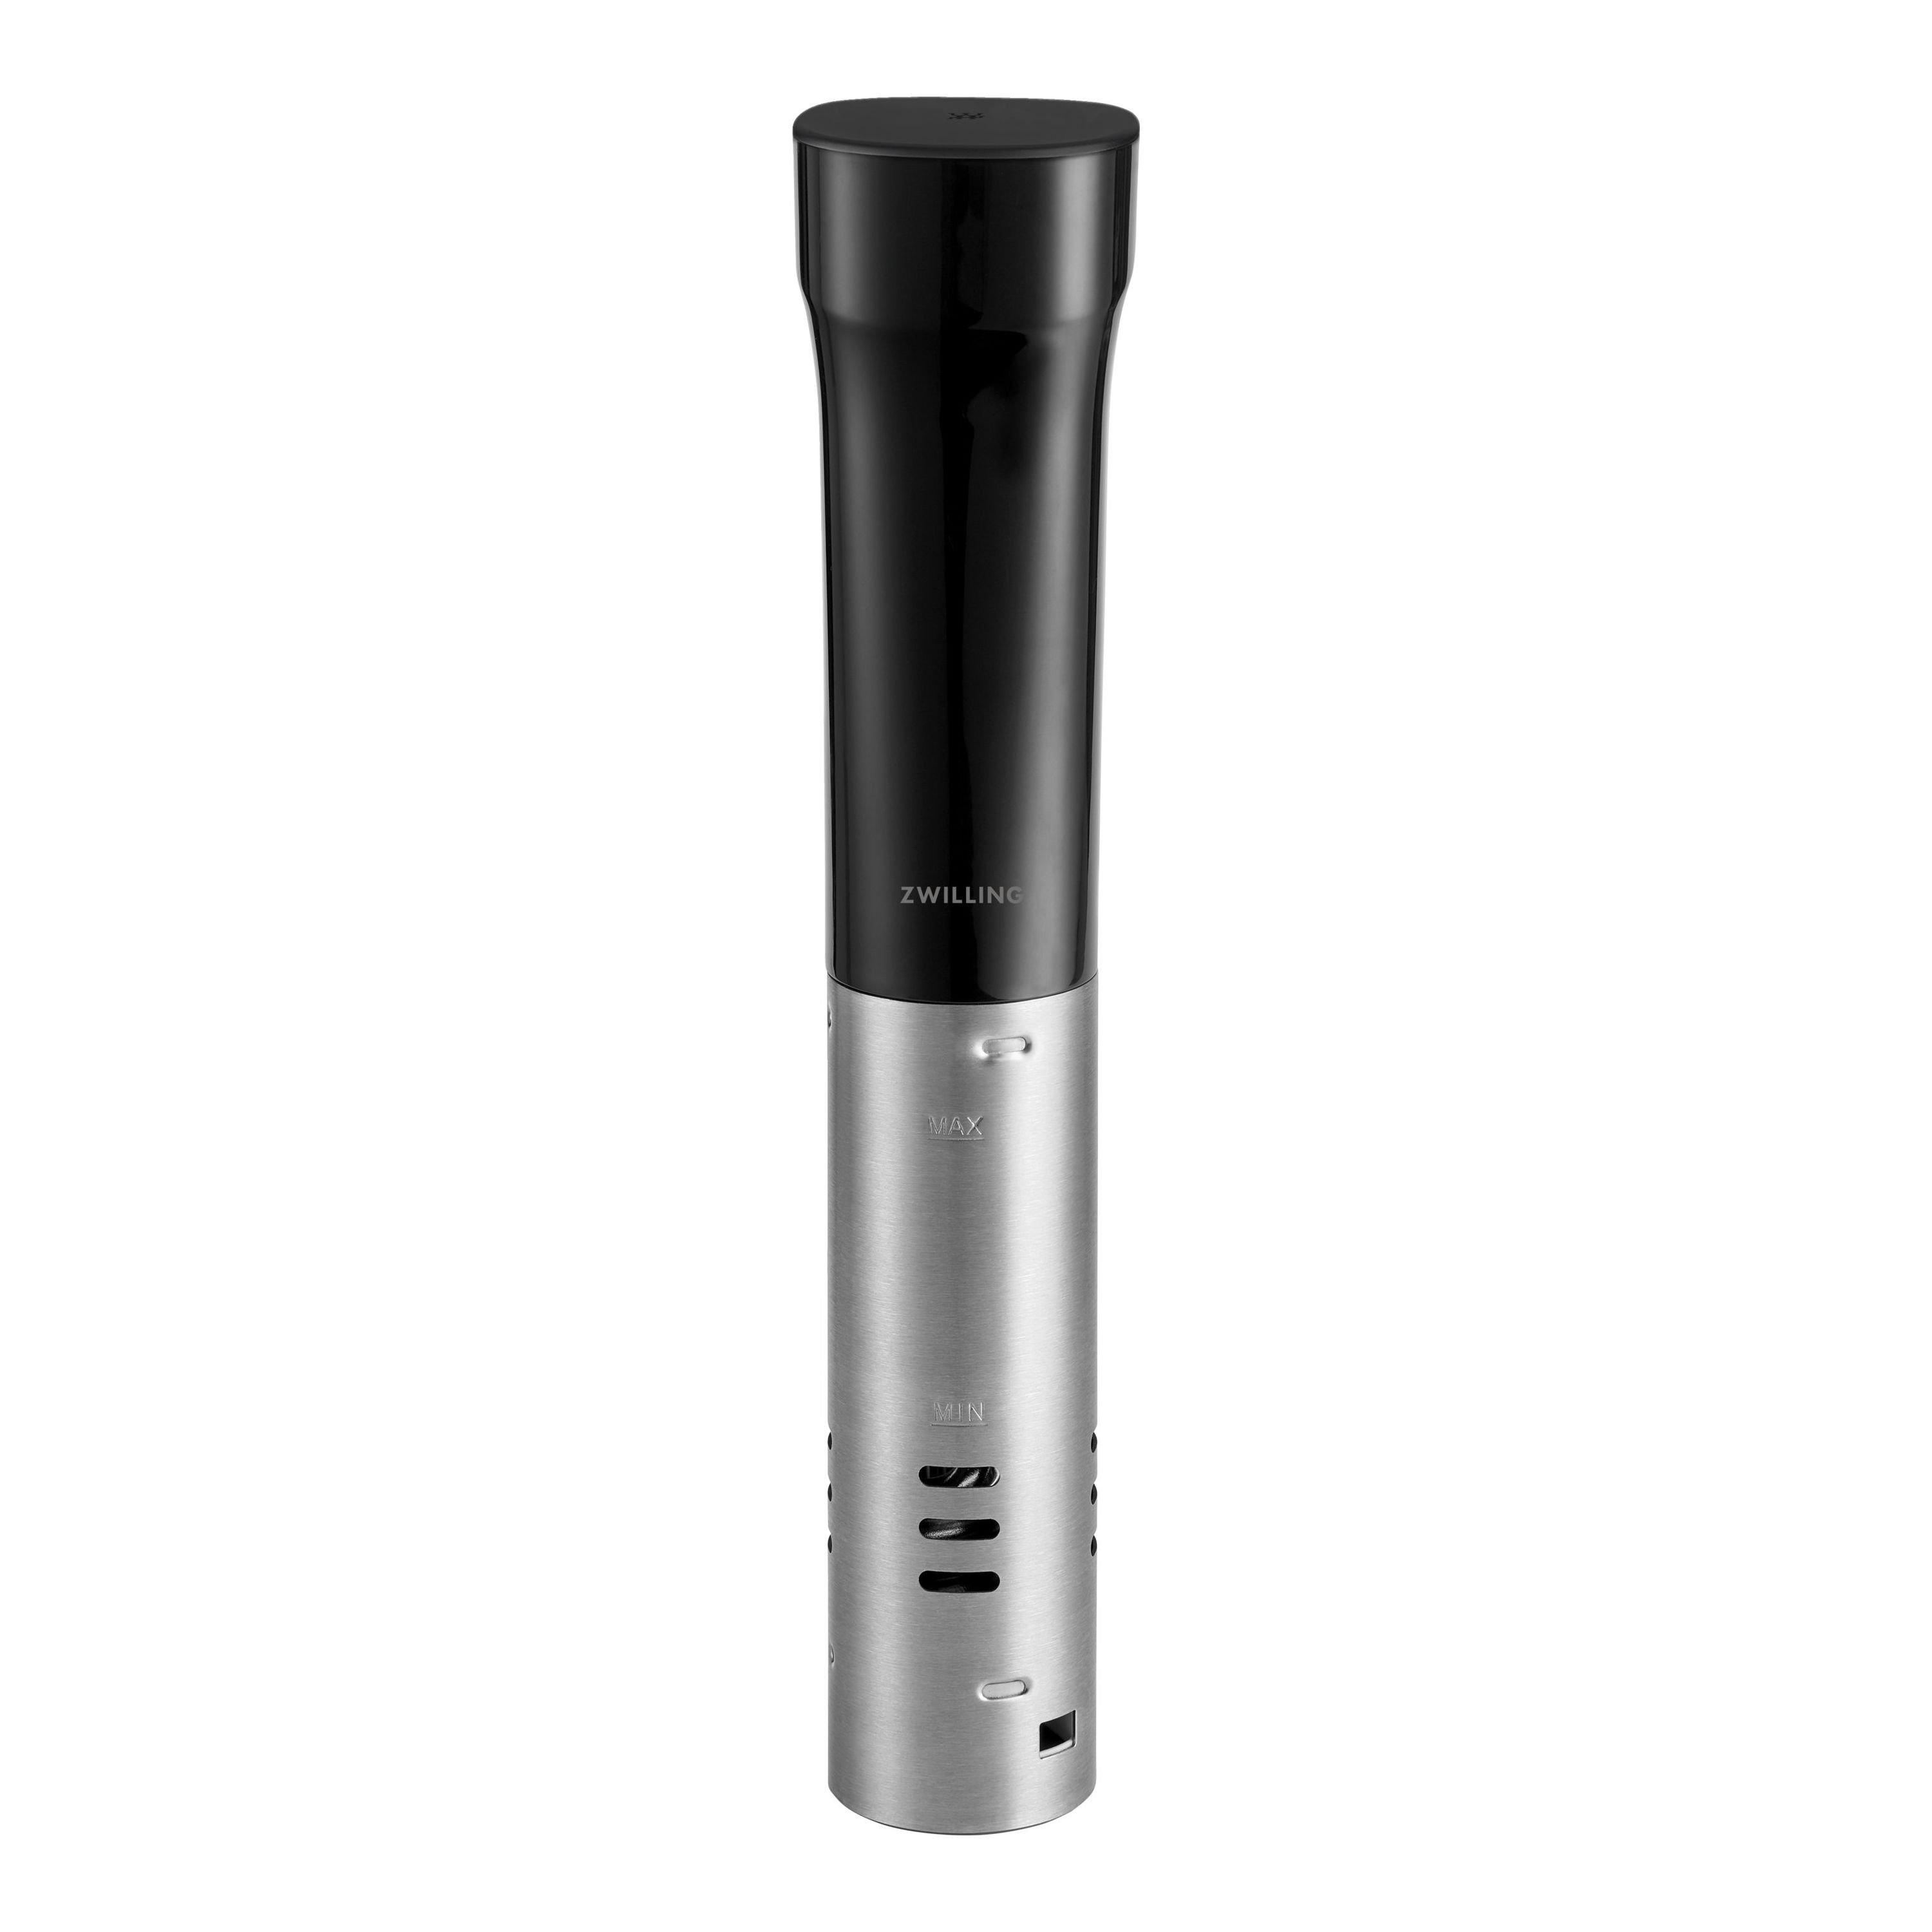 ZWILLING Enfinigy Sous Vide Stick, Silver